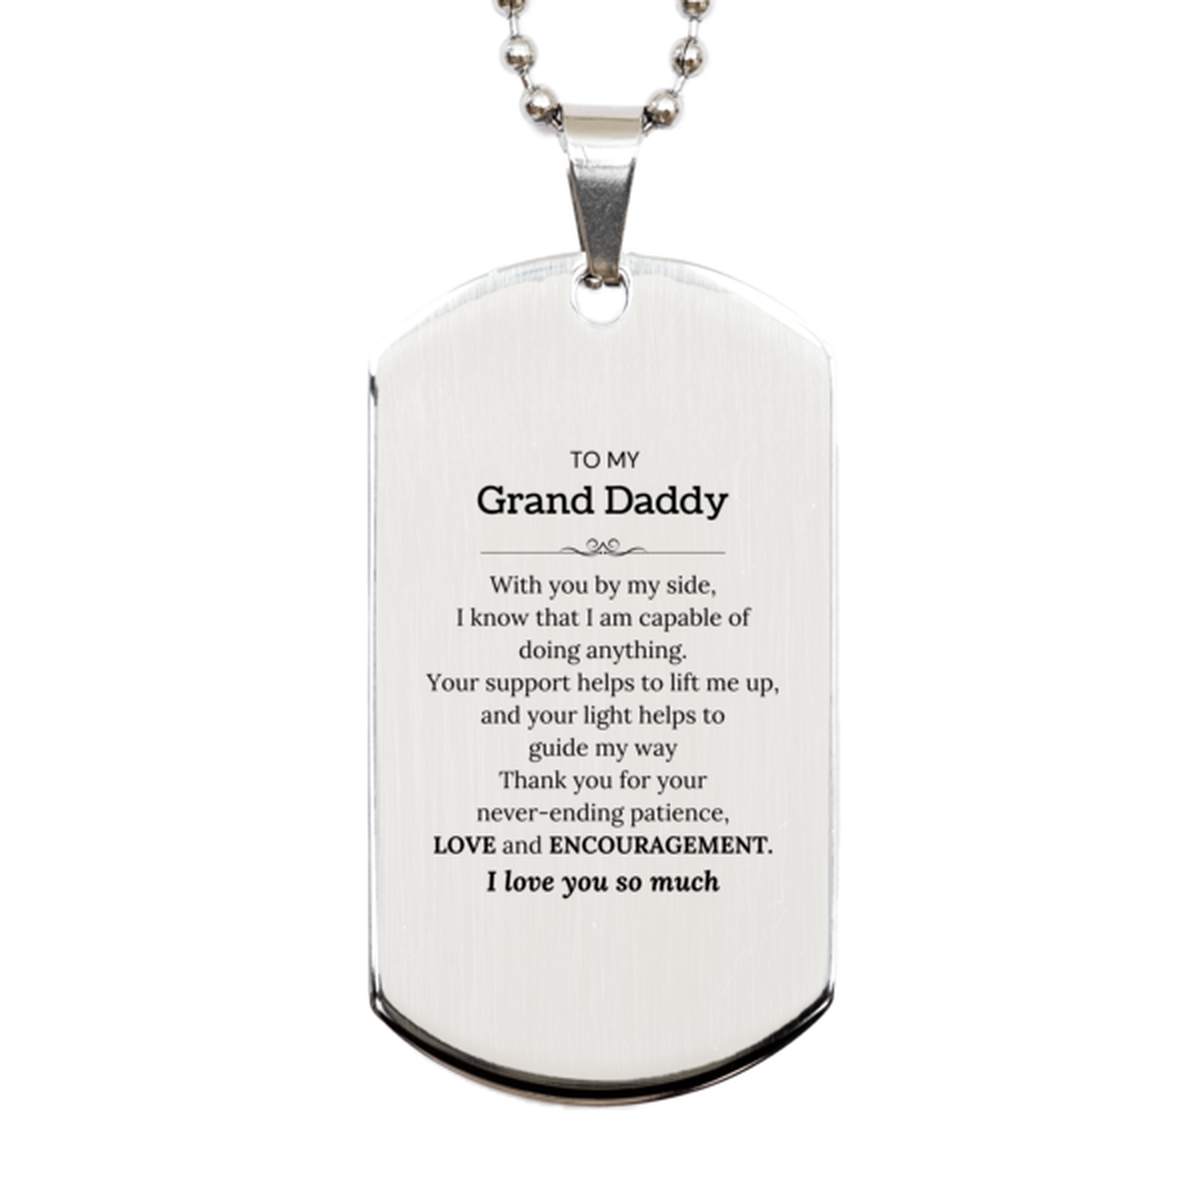 Appreciation Grand Daddy Silver Dog Tag Gifts, To My Grand Daddy Birthday Christmas Wedding Keepsake Gifts for Grand Daddy With you by my side, I know that I am capable of doing anything. I love you so much